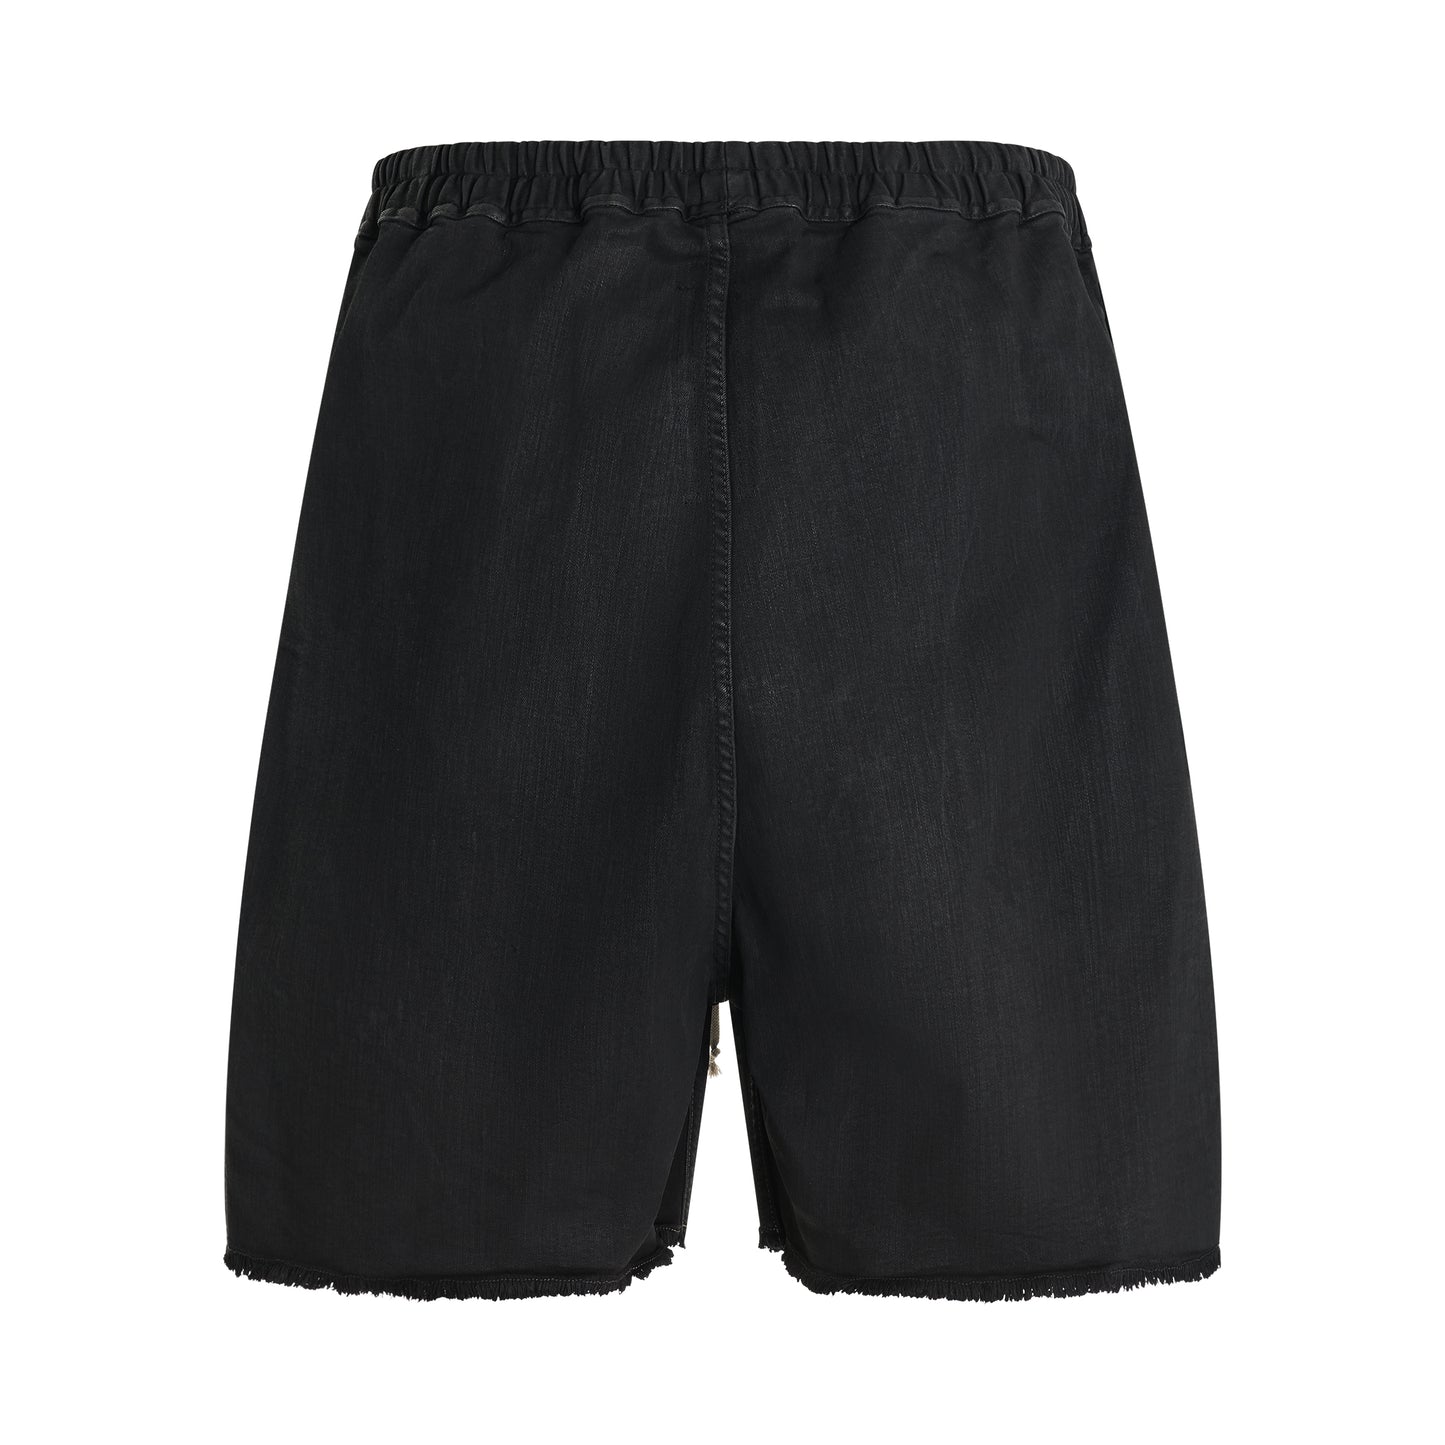 Long Boxers Shorts in Black Wax